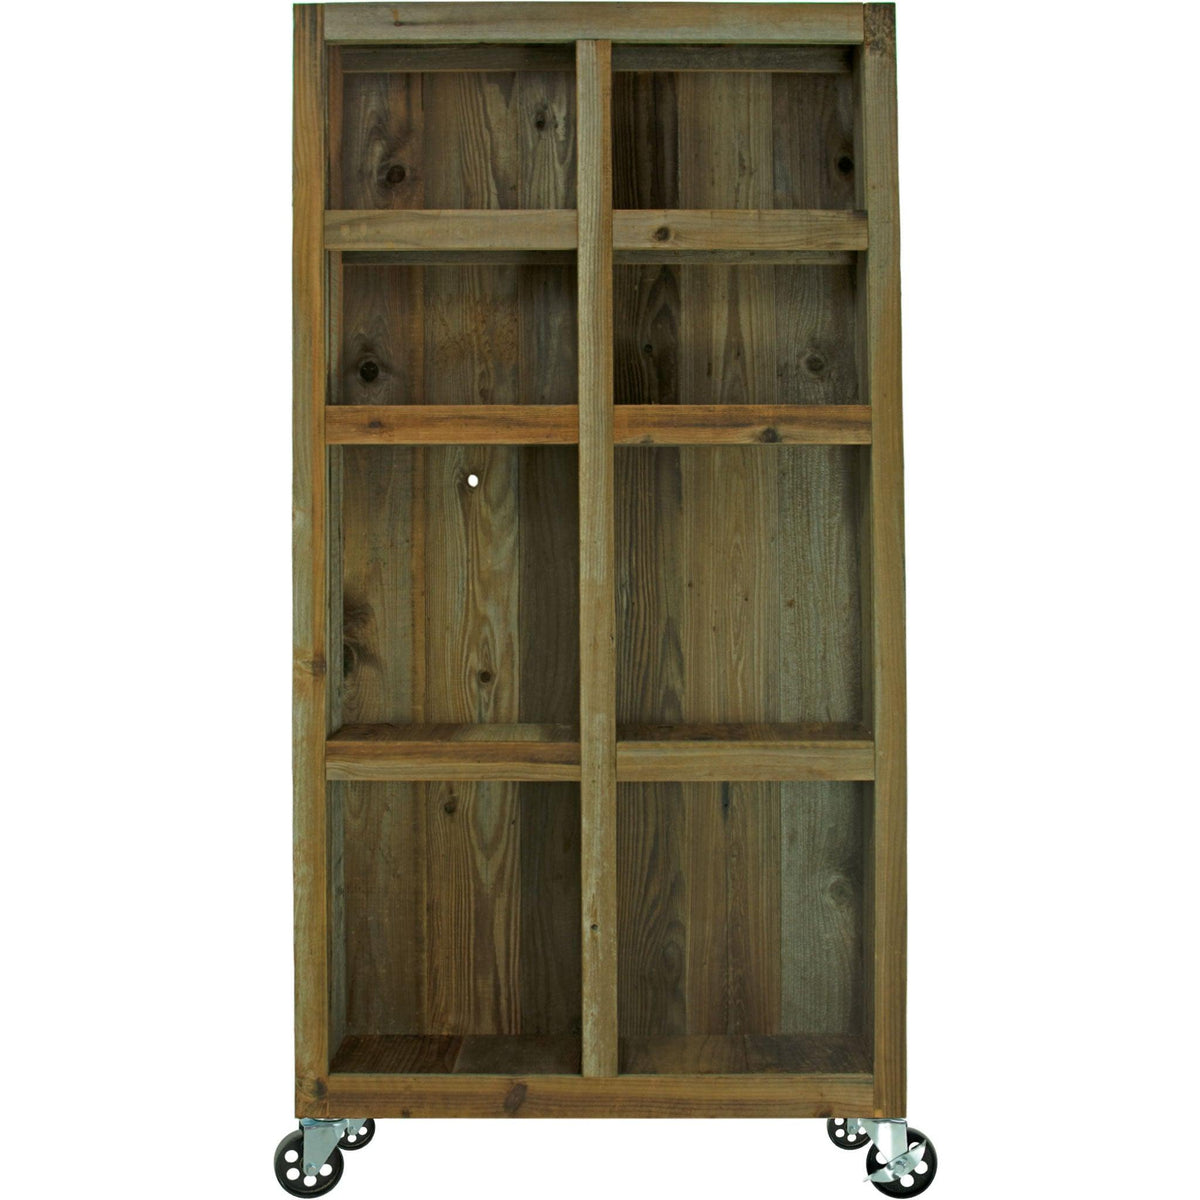 Front angle of Lee Display's brand new Outdoor Rolling Redwood Storage Cabinet with Wheels. Shelving Unit with 5in Galvanized Steel Casters on sale at leedisplay.com